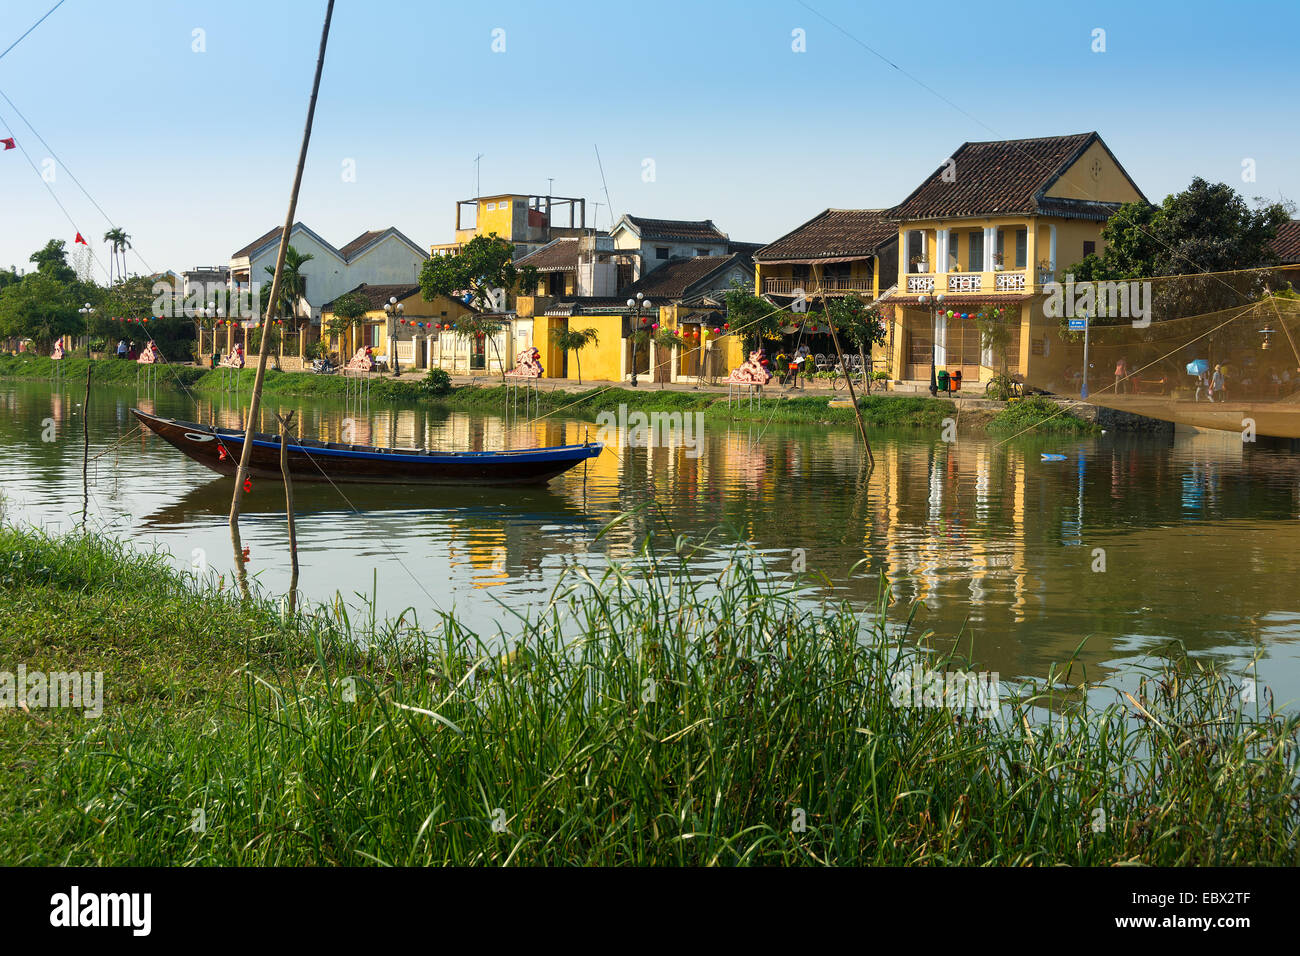 River scene of Hoi An in Vietnam with traditional fishing boat. Stock Photo